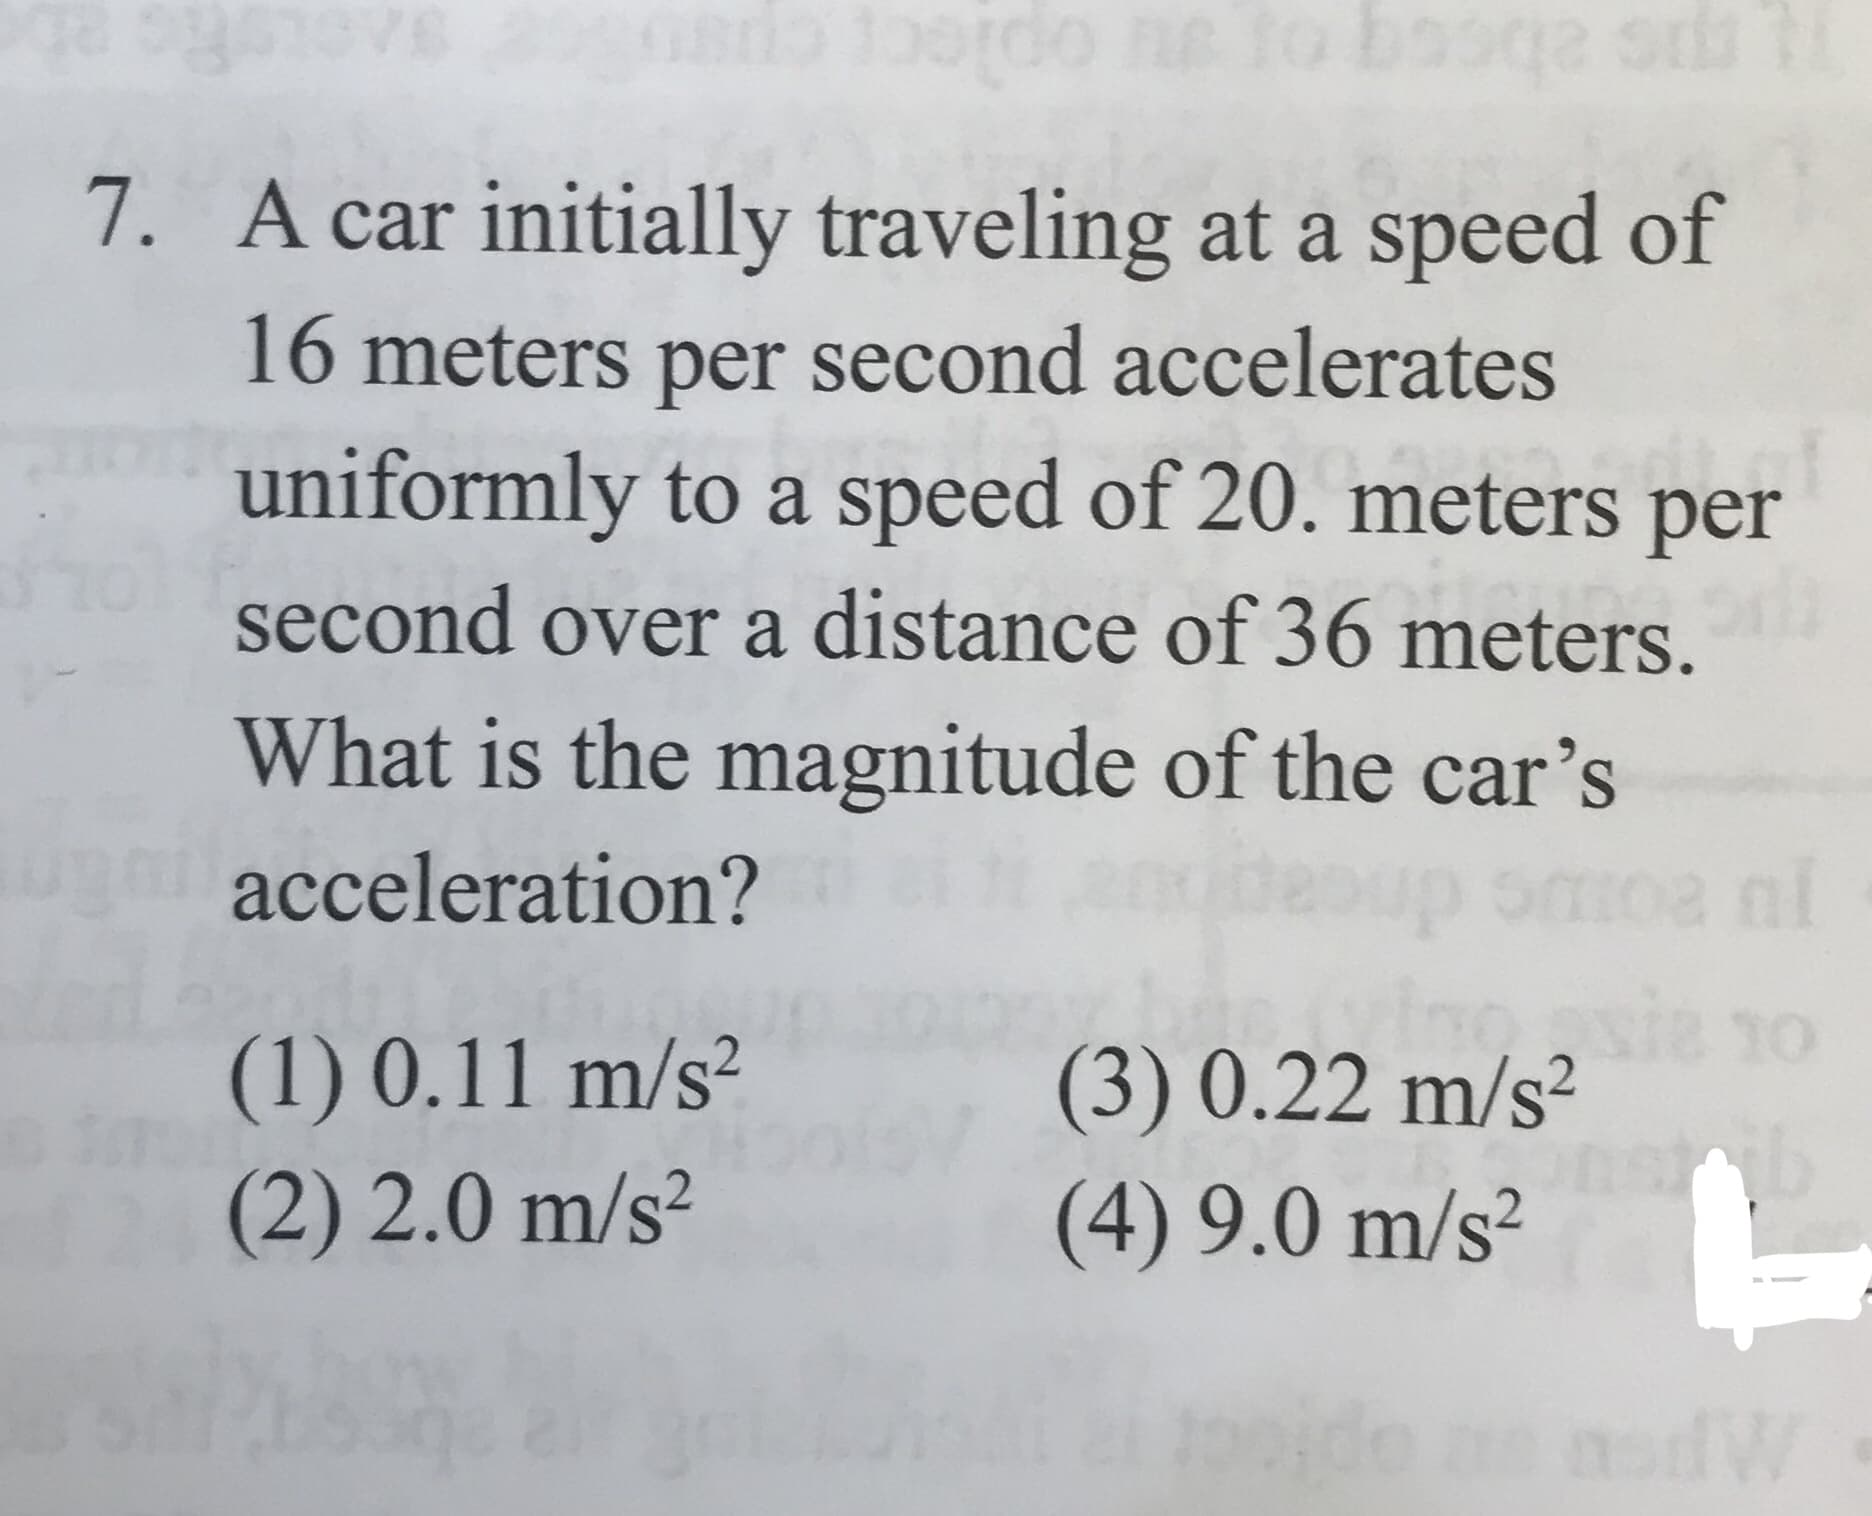 A car initially traveling at a speed of
7.
16 meters per second accelerates
uniformly to a speed of 20. meters per
second over a distance of 36 meters.
What is the magnitude of the car's
acceleration?
sie 1o
(3) 0.22 m/s2
(1) 0.11 m/s2
(2) 2.0 m/s2
(4) 9.0 m/s2
ido a
W
